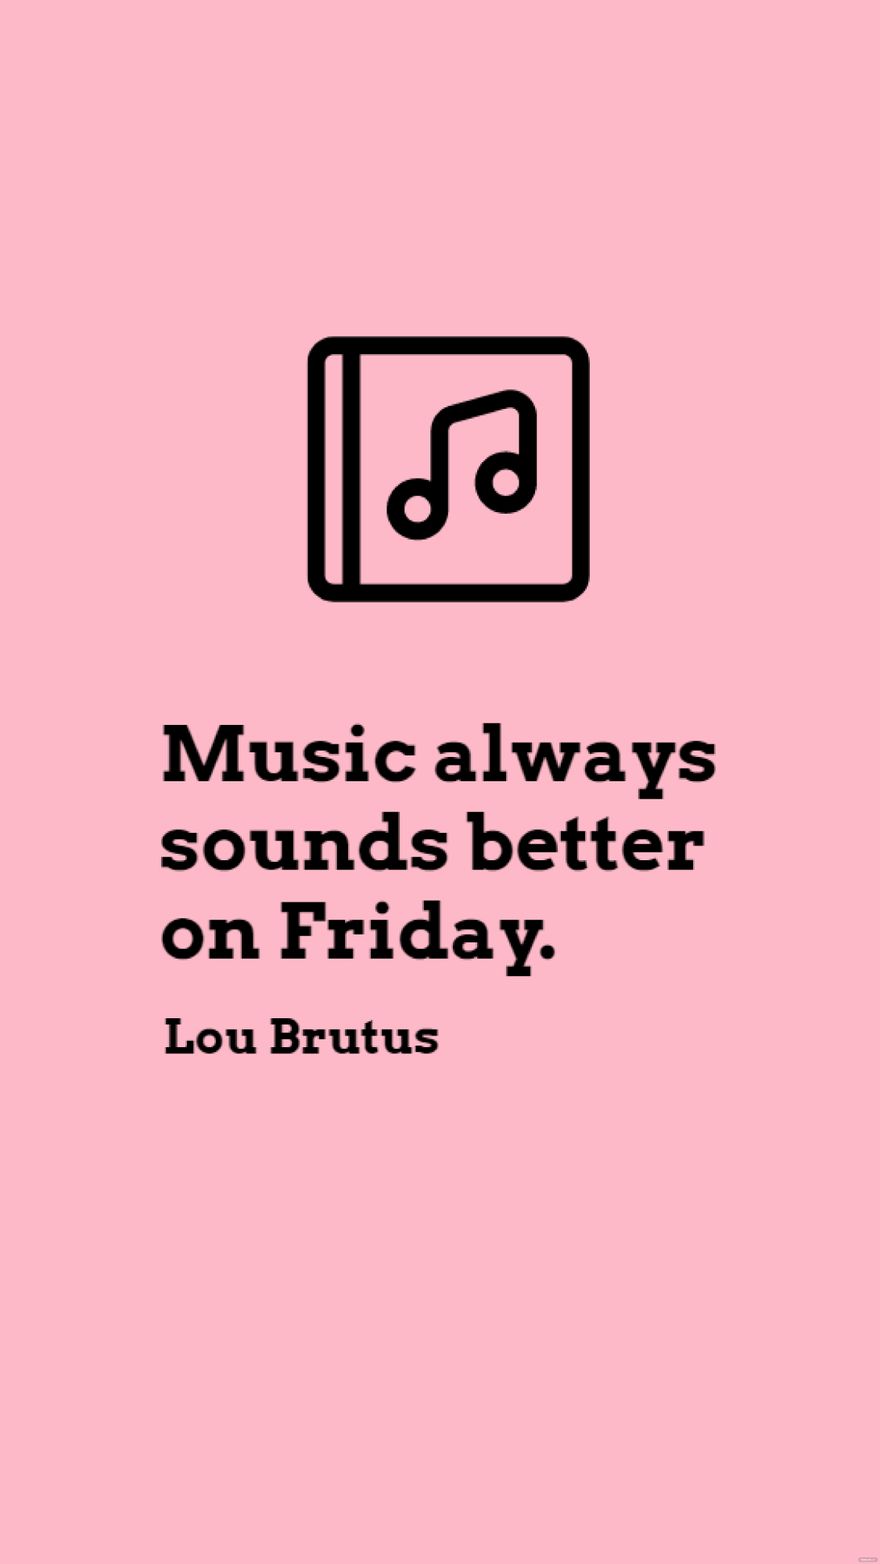 Lou Brutus - Music always sounds better on Friday.